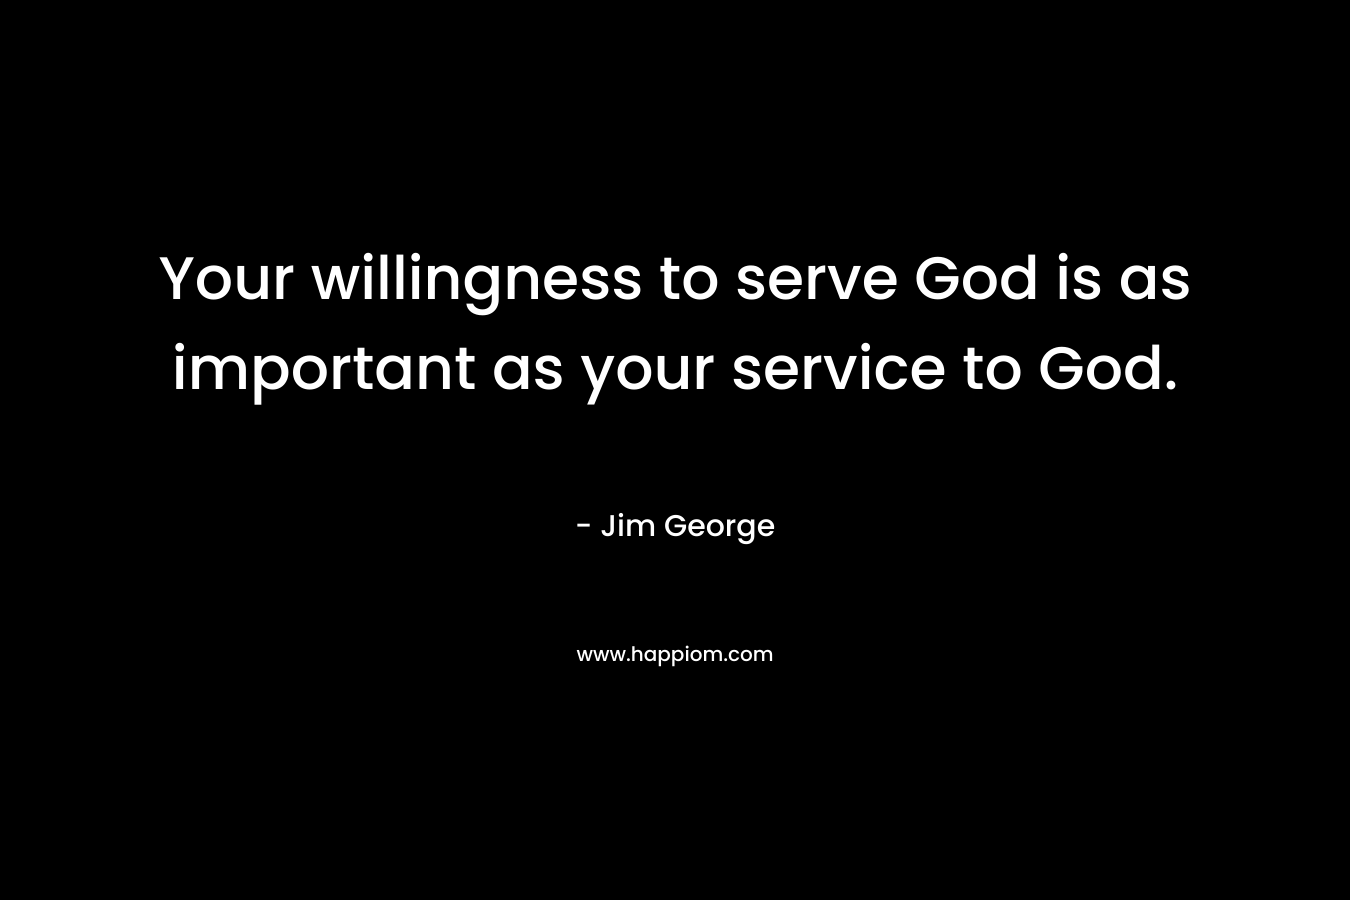 Your willingness to serve God is as important as your service to God.